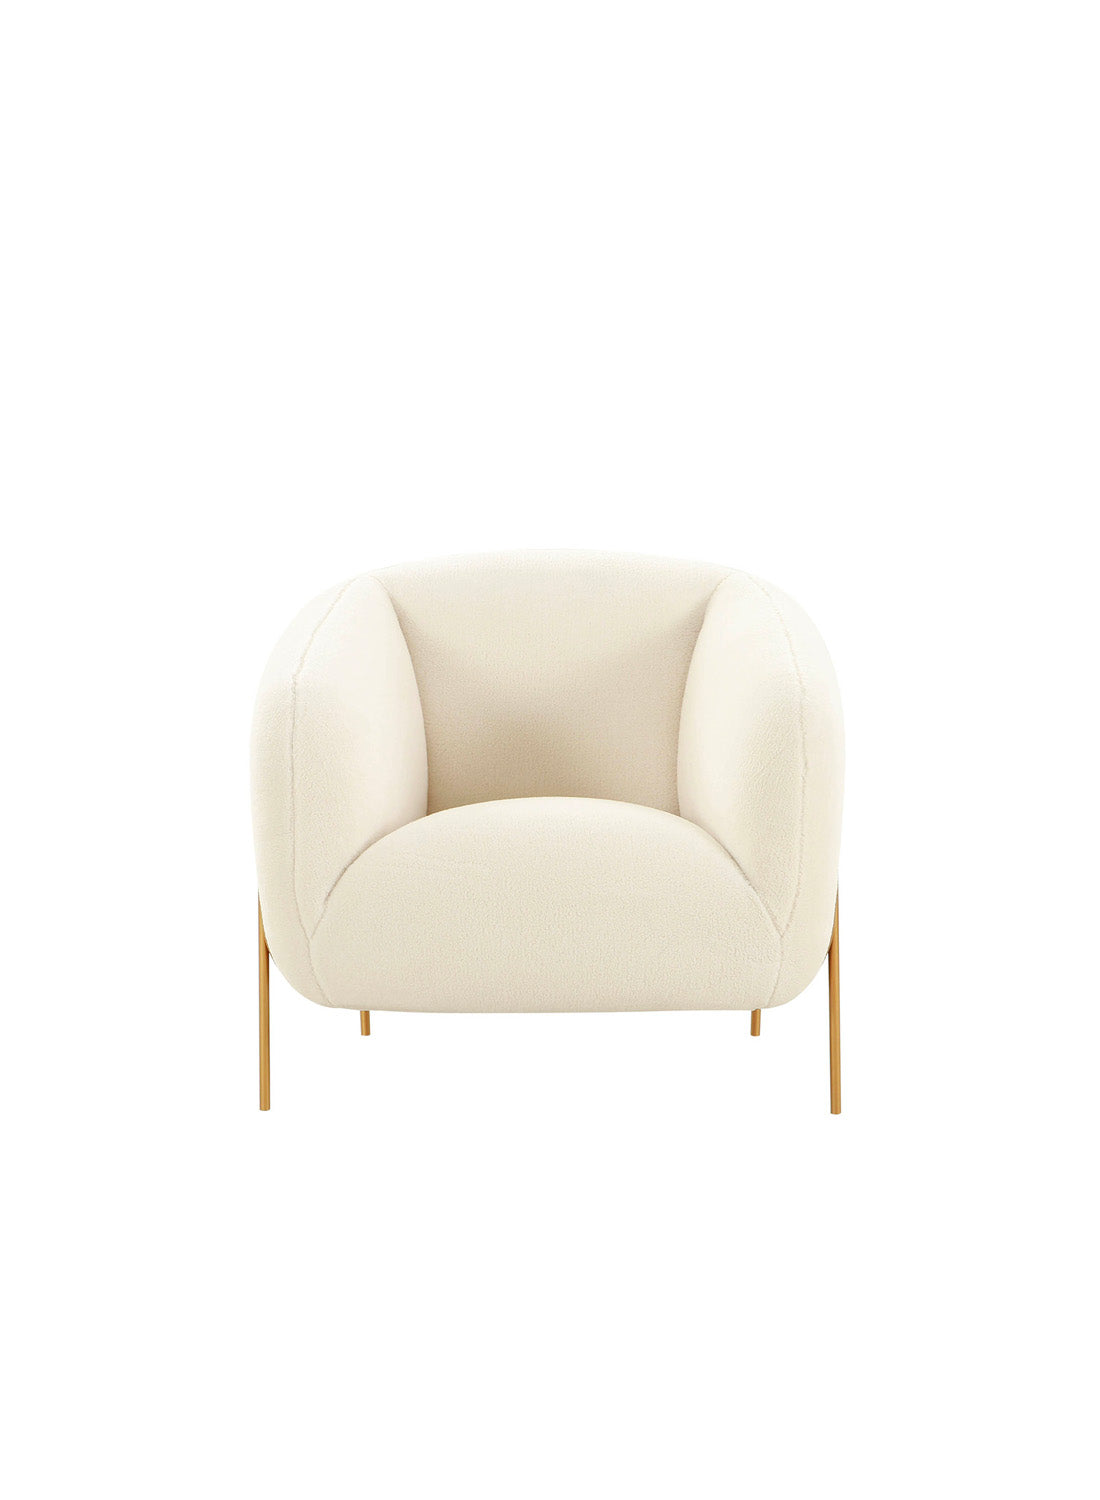 Kandria Shearling Accent Chair